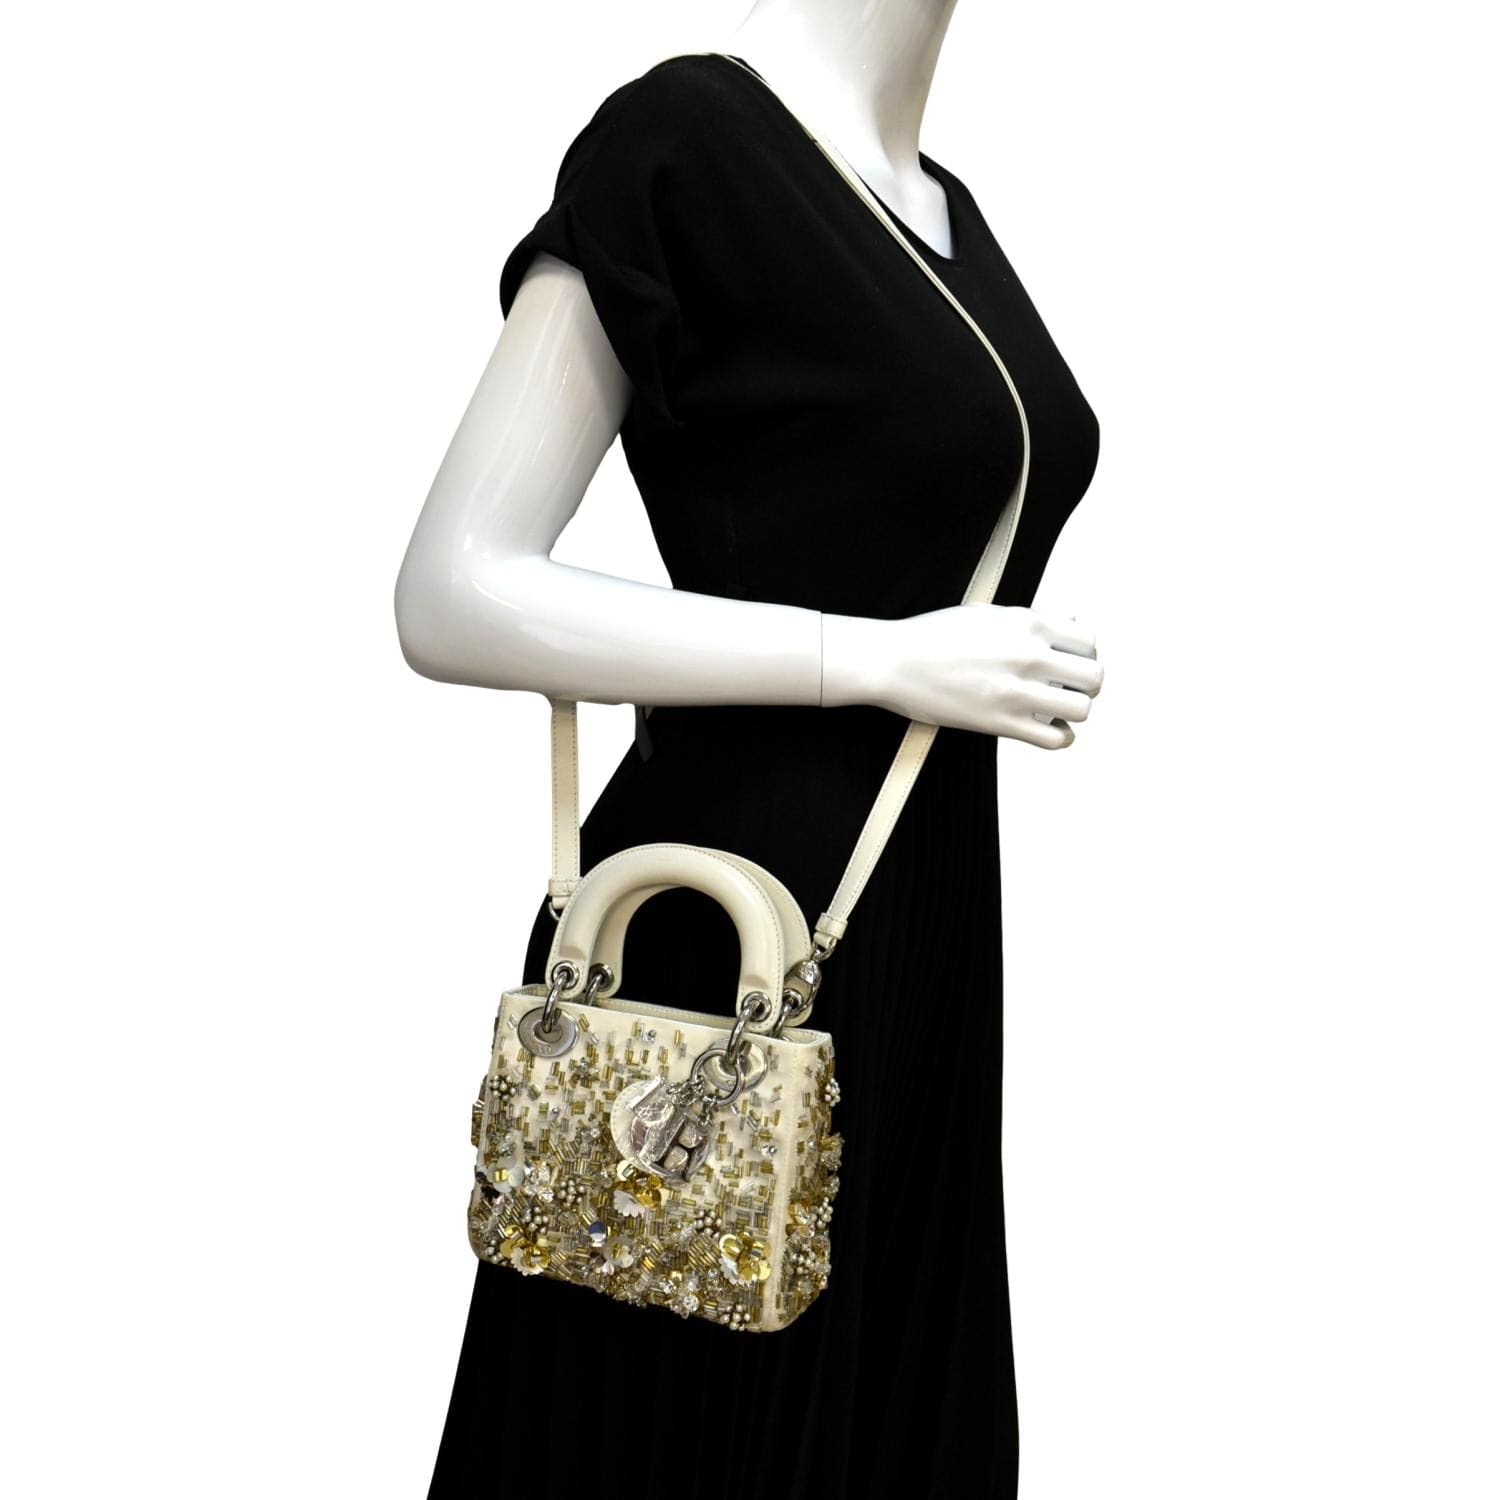 Lady Dior Mini in Silver Satin Bag with Crystal Details - AWL1627